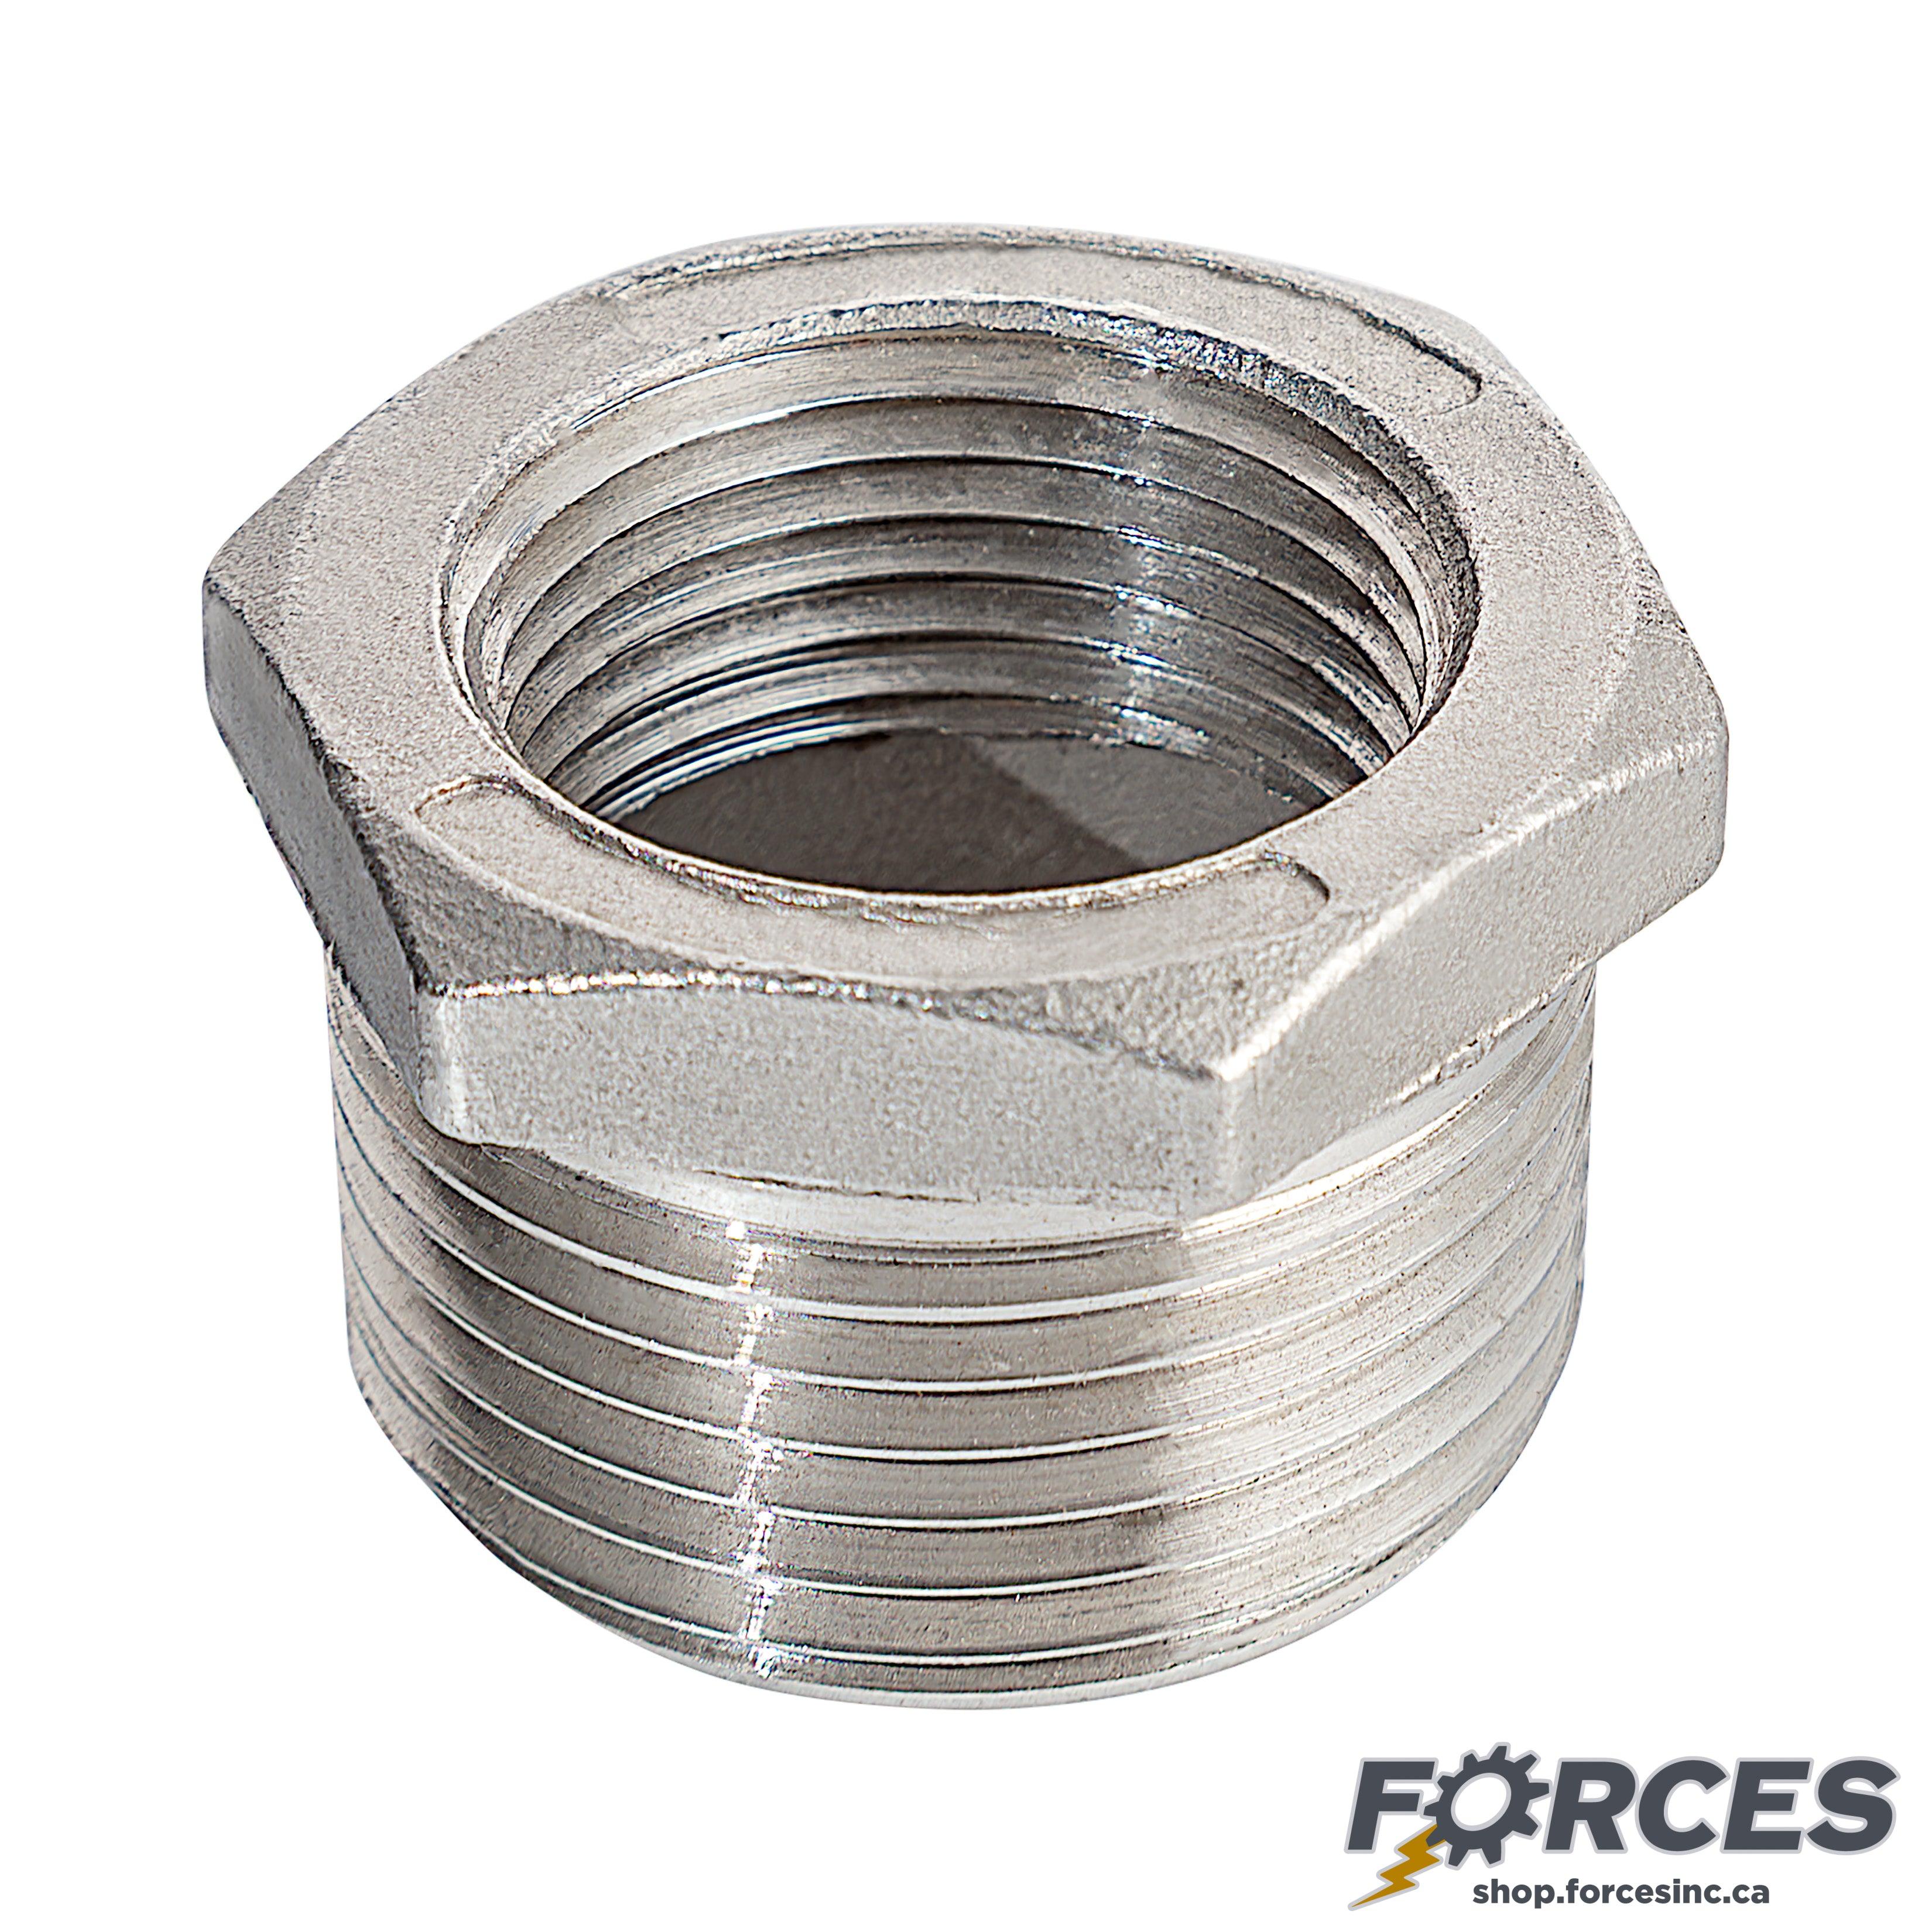 1-1/2" (M) x 1-1/4" (F) Reducing Hex Bushing NPT #150 - Stainless Steel 316 - Forces Inc